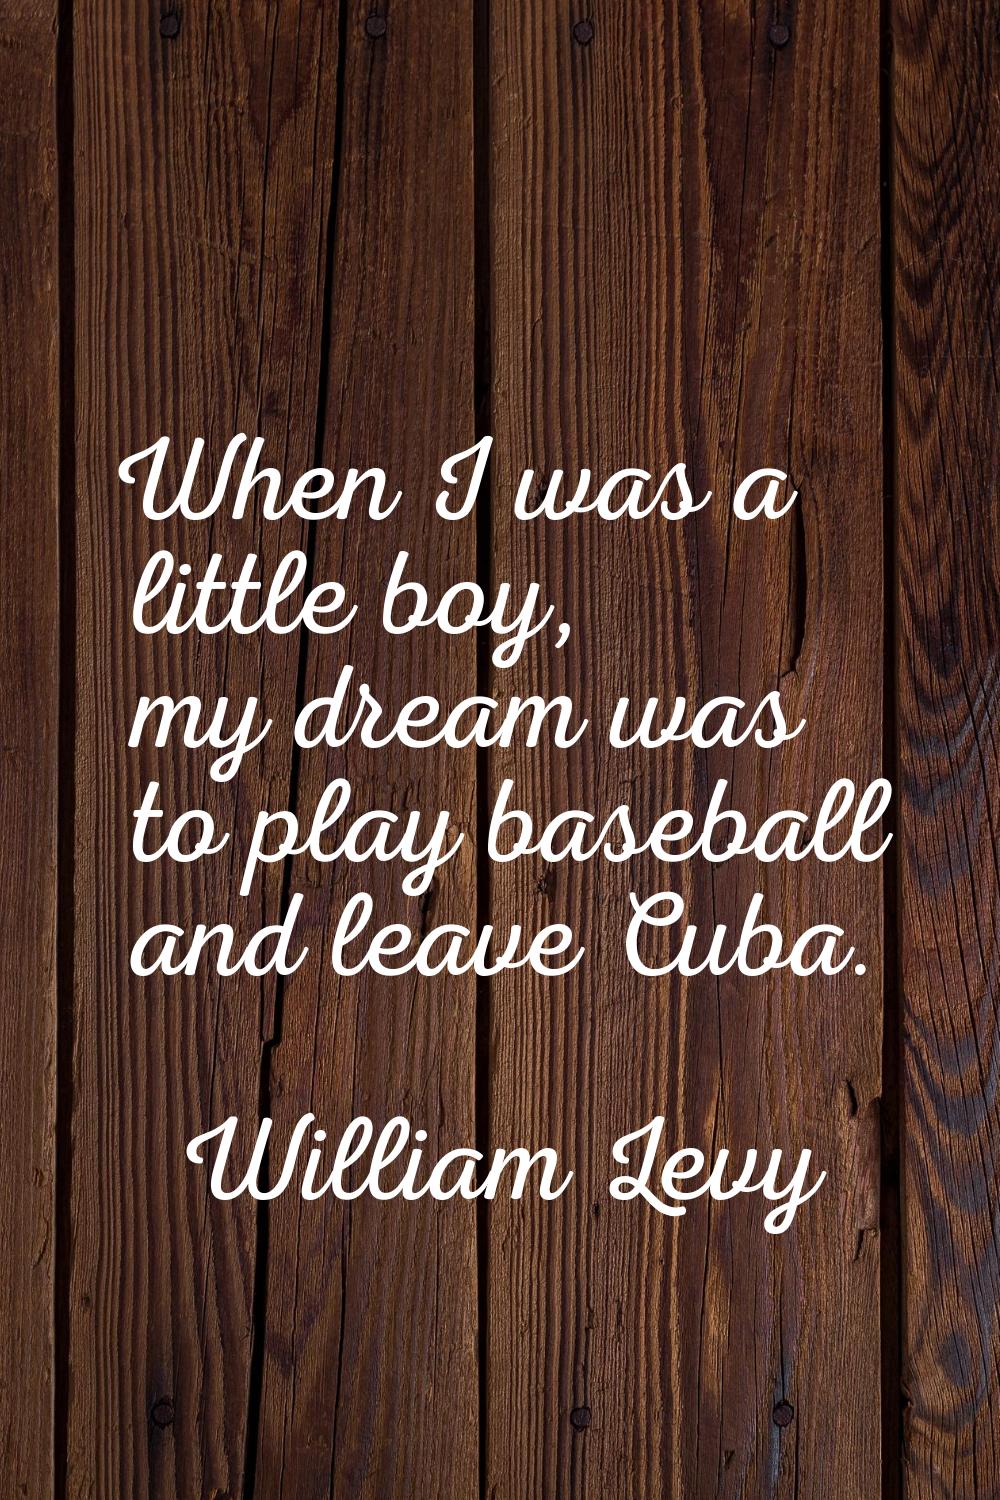 When I was a little boy, my dream was to play baseball and leave Cuba.